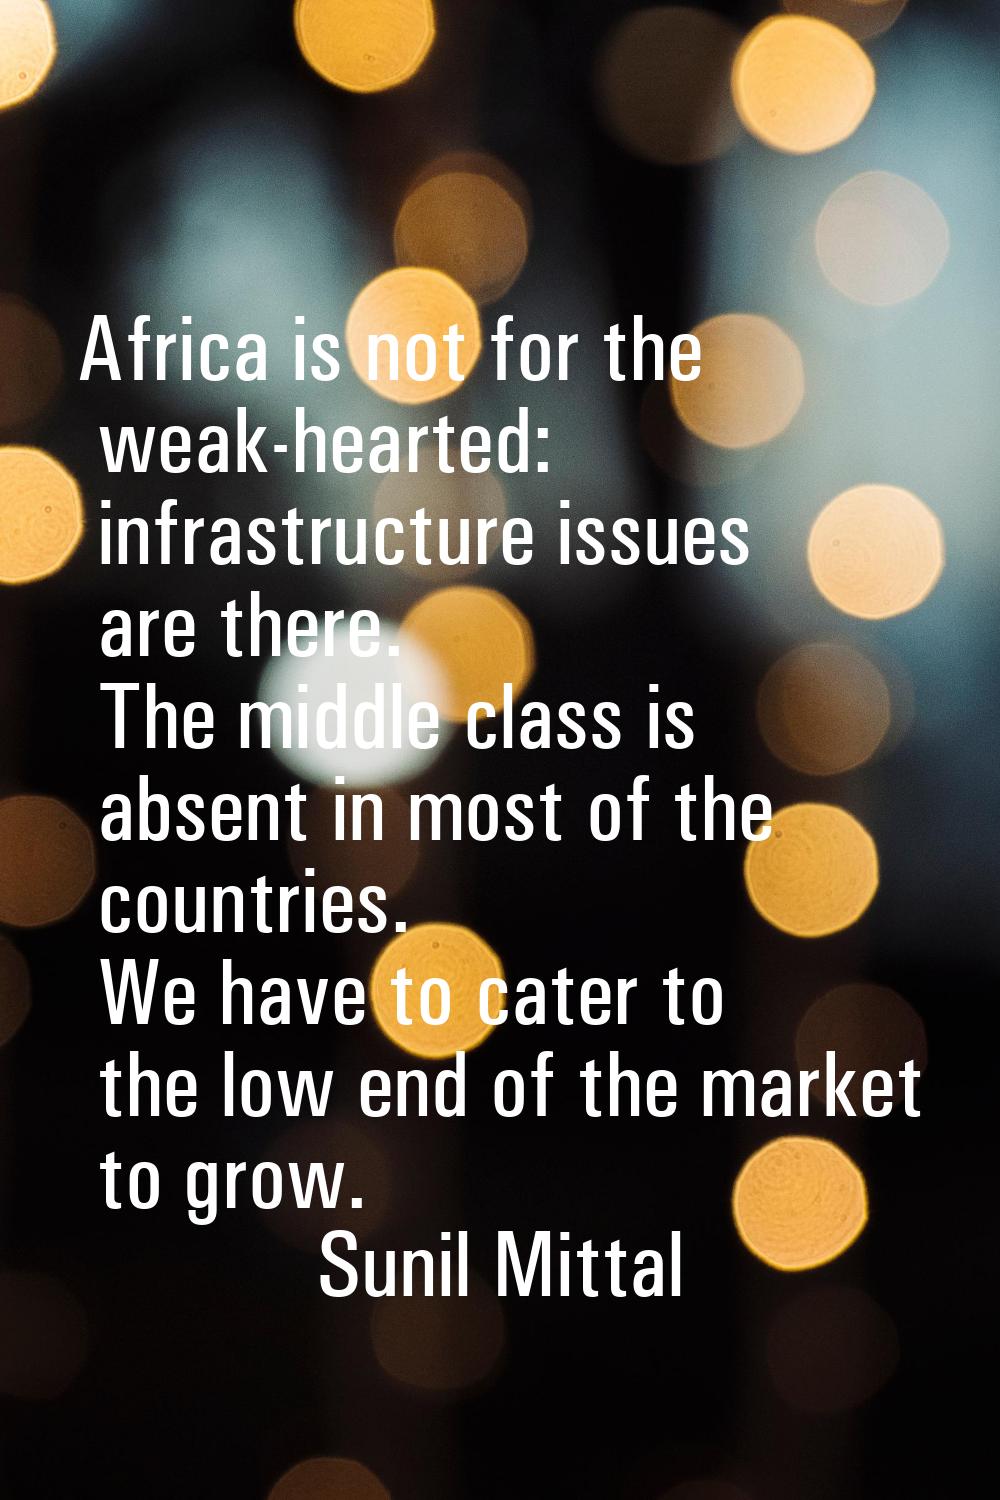 Africa is not for the weak-hearted: infrastructure issues are there. The middle class is absent in 